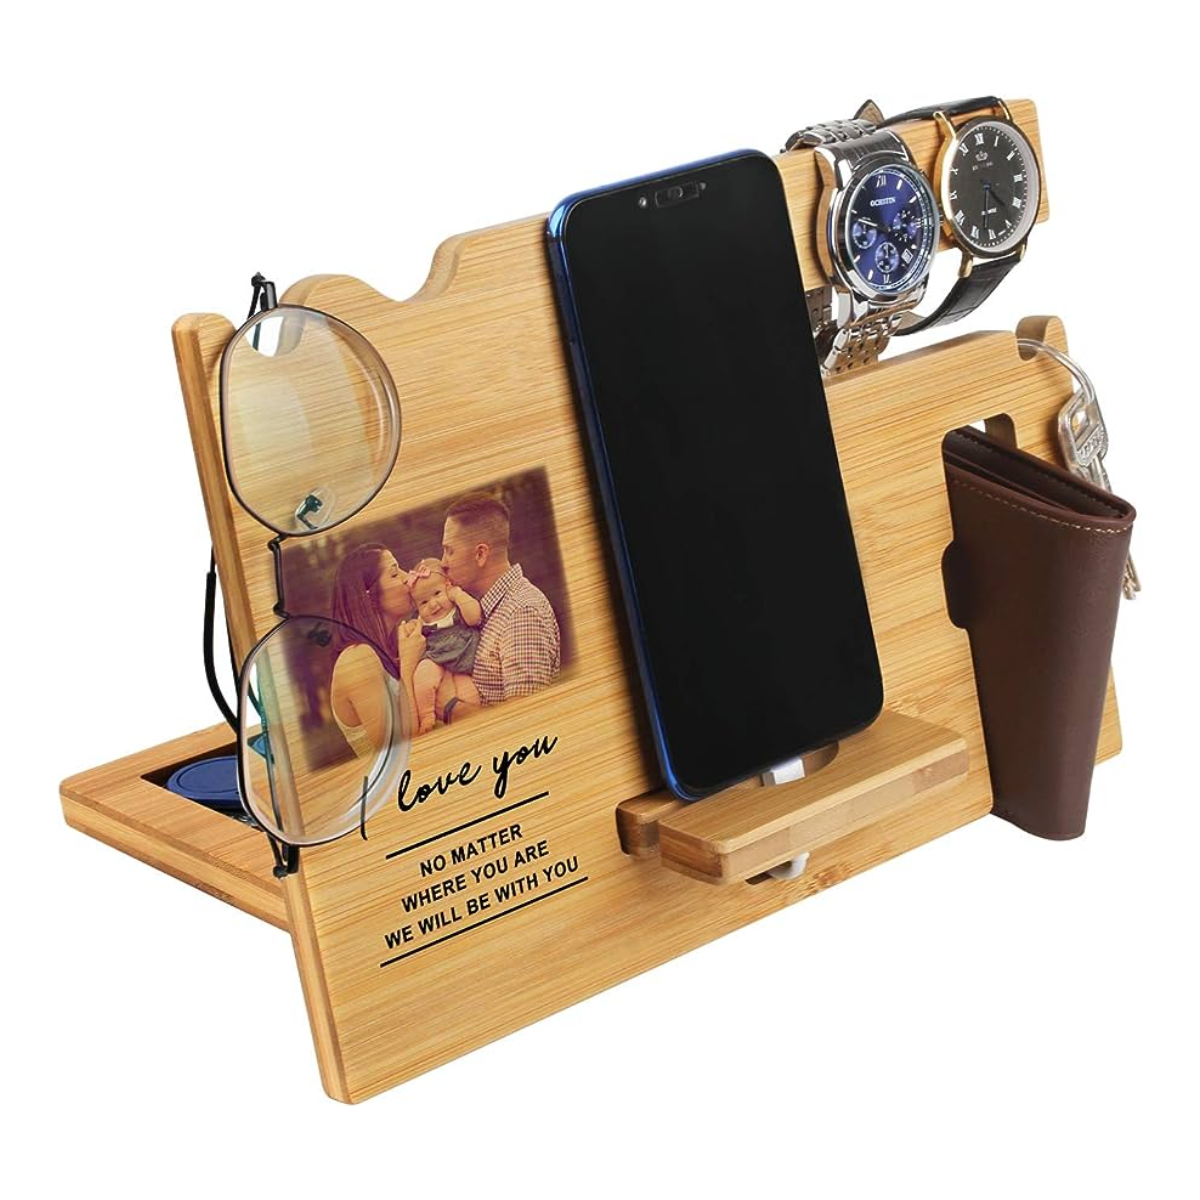 10. Personalized Wooden Phone Dock: A Thoughtful and Unique Anniversary Gift for Him